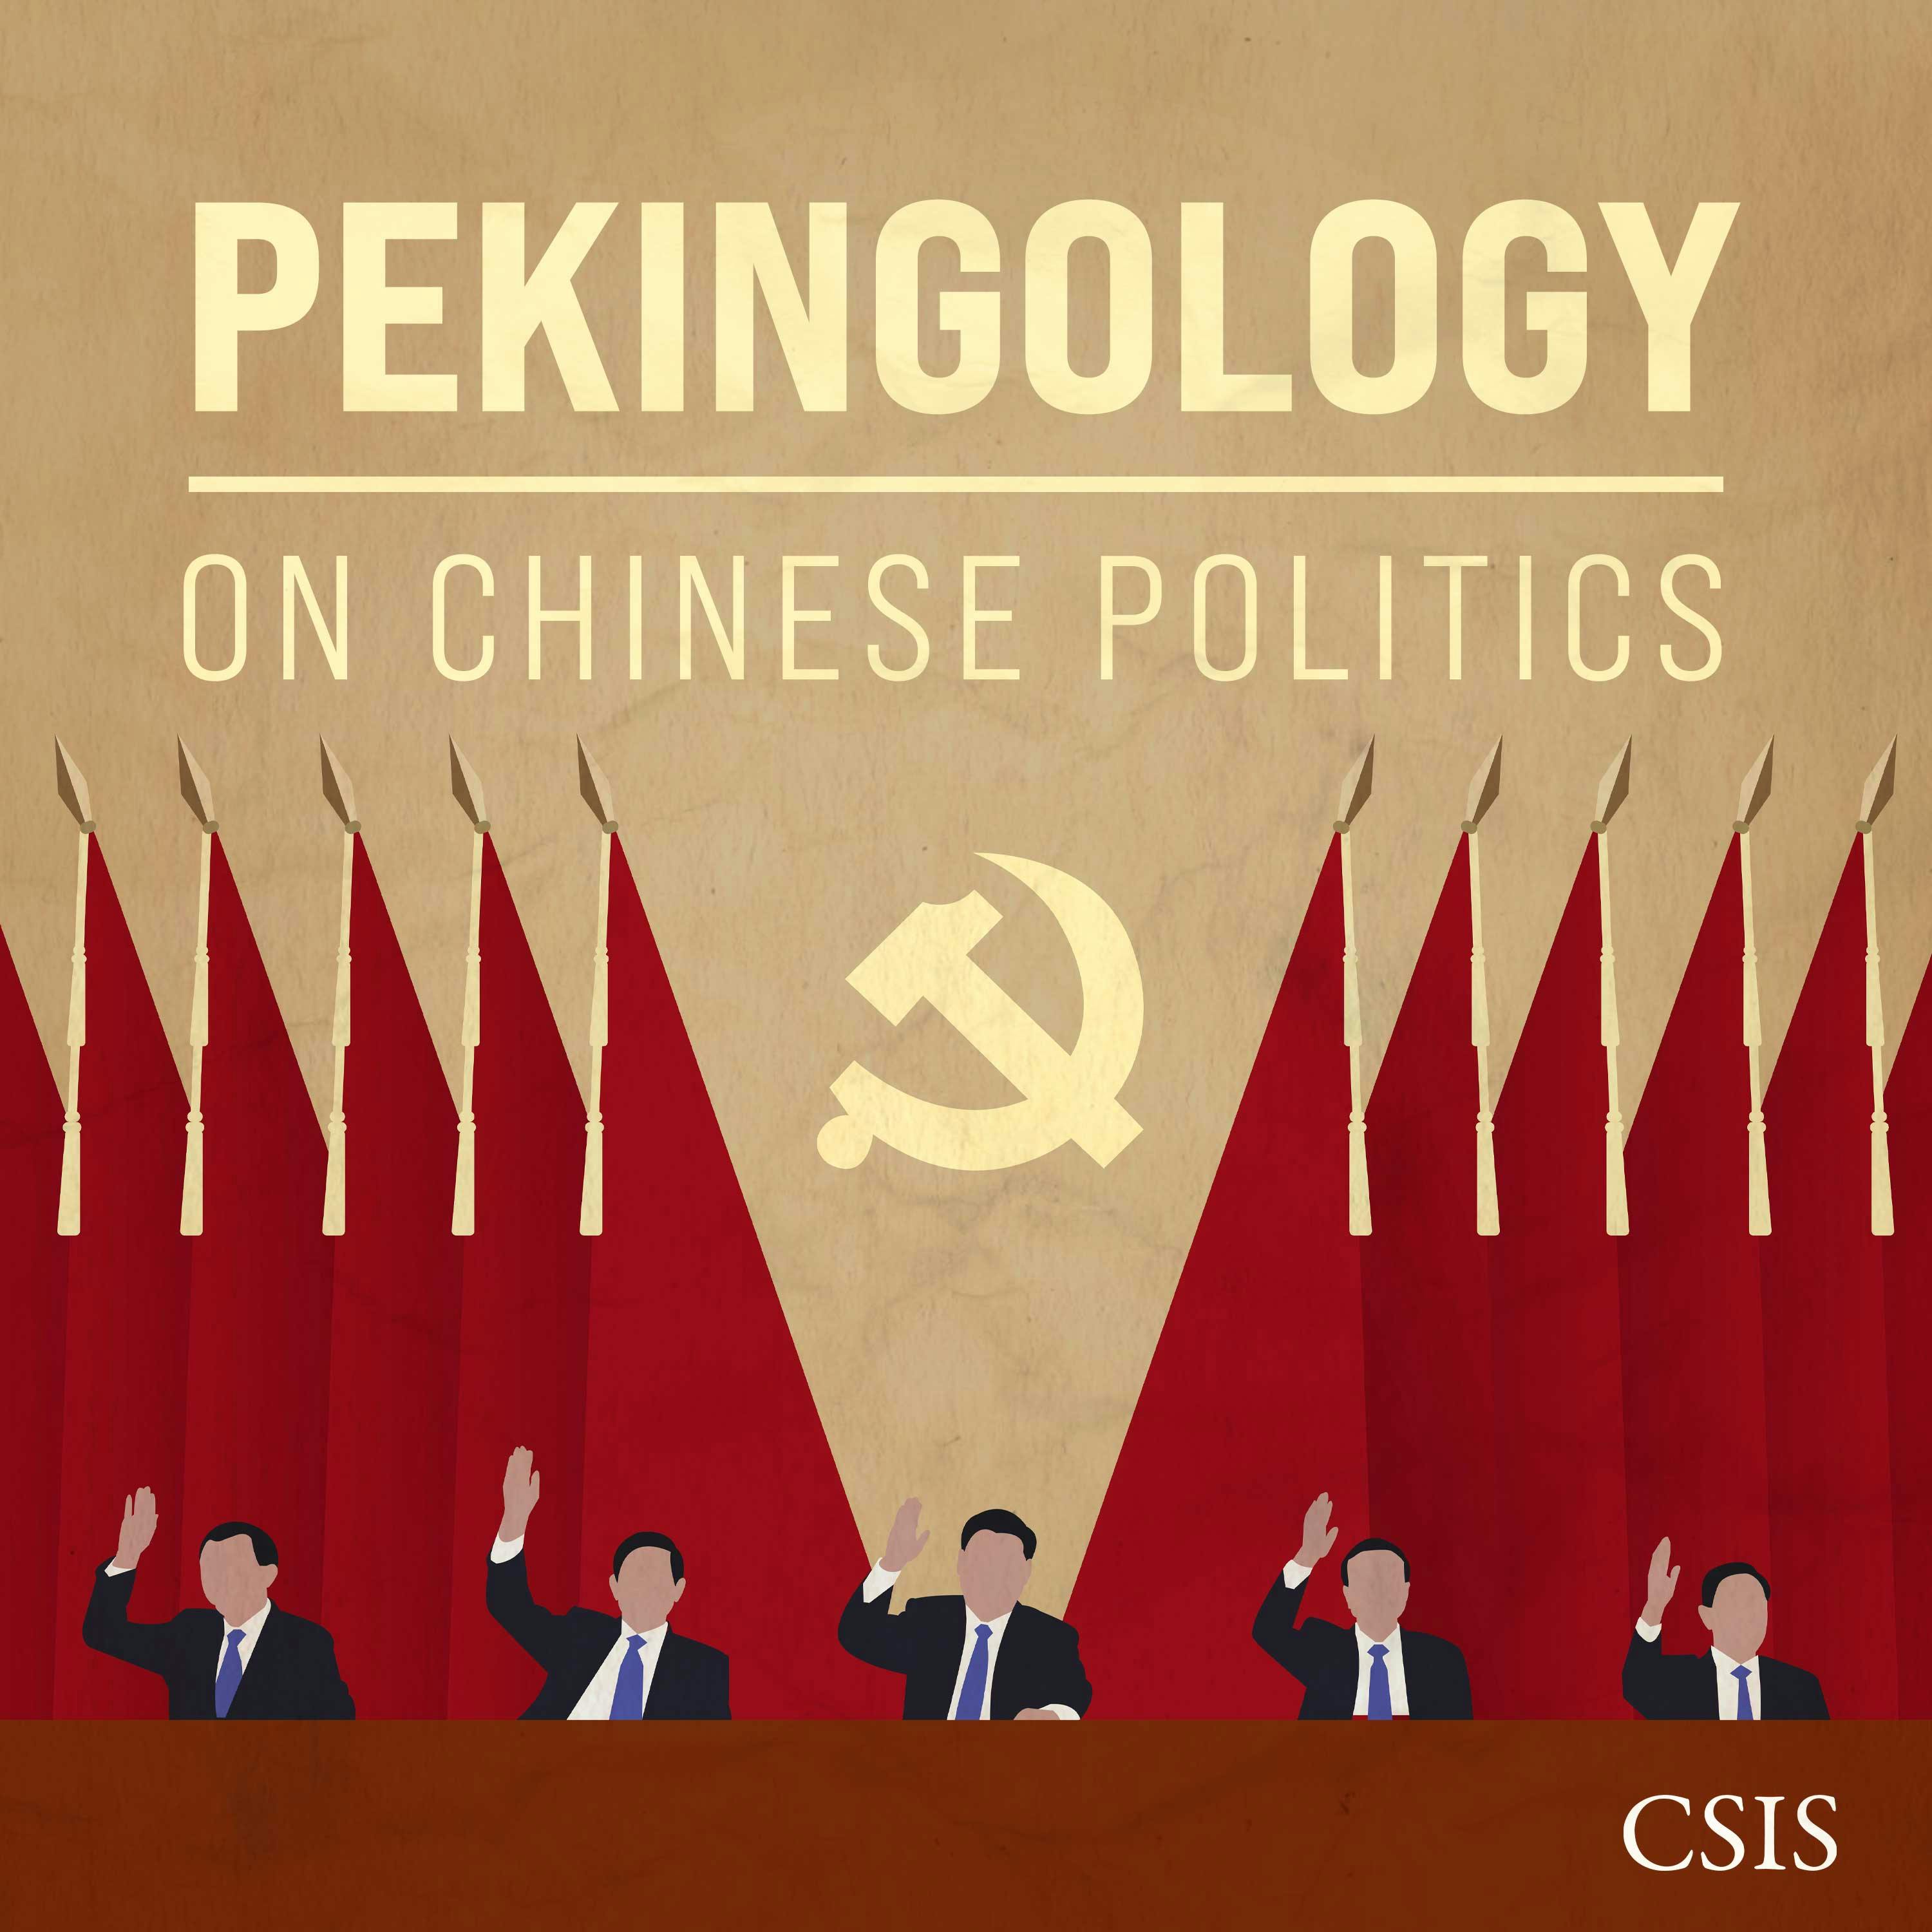 Ideology and Law in Xi Jinping's China